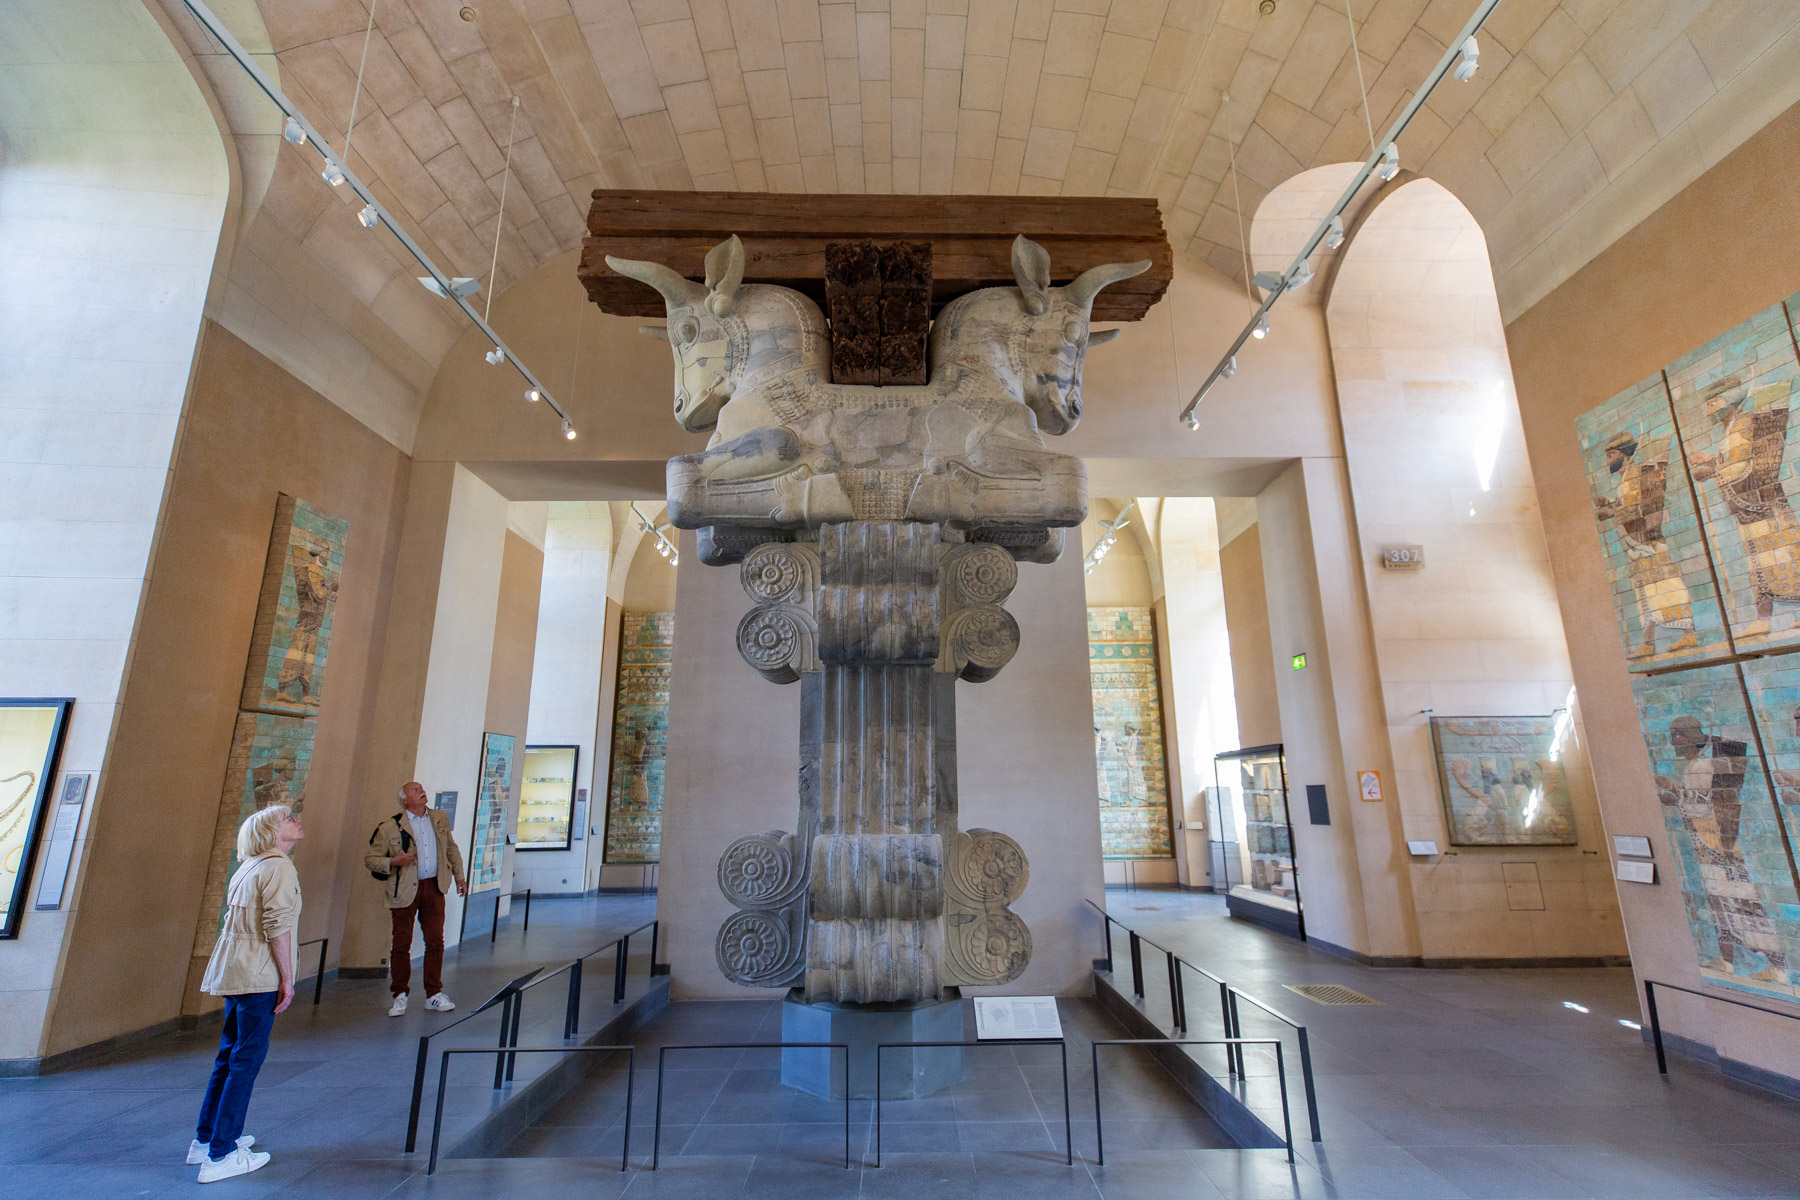 Palace of Darius, things to see at The Louvre